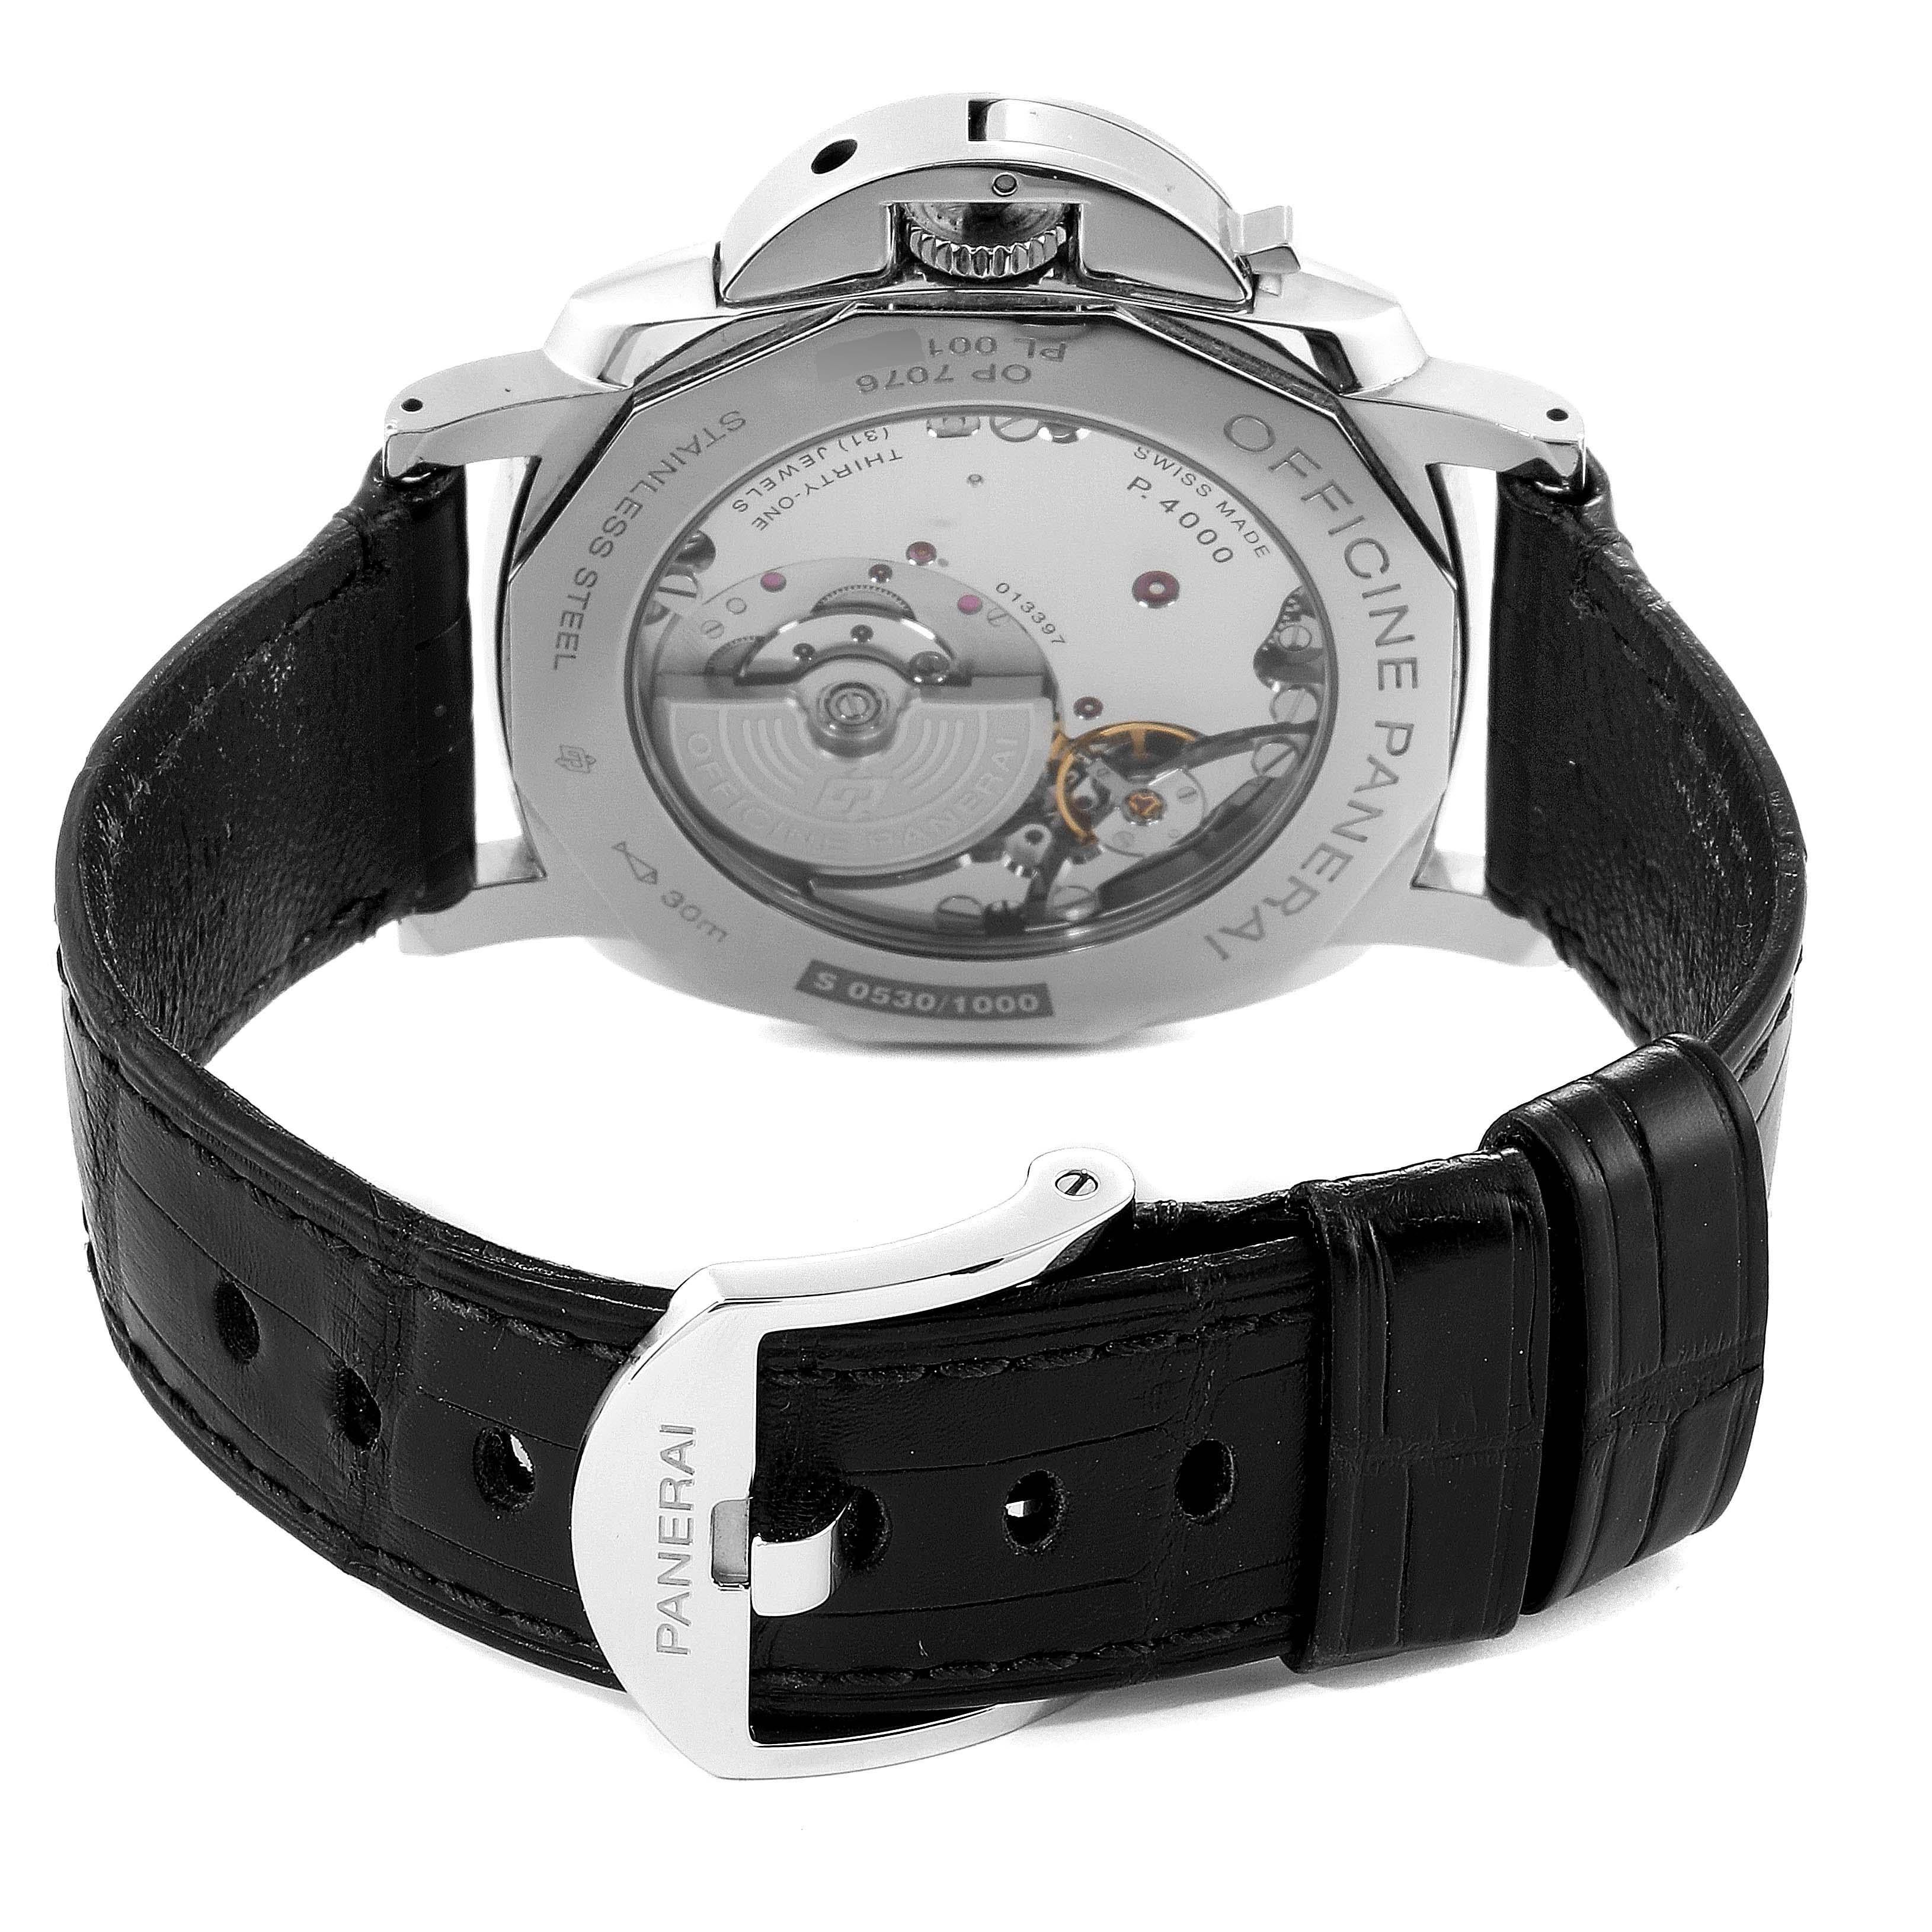 Panerai Luminor Due 3 Days Men's Watch PAM00674 Box Papers For Sale 1